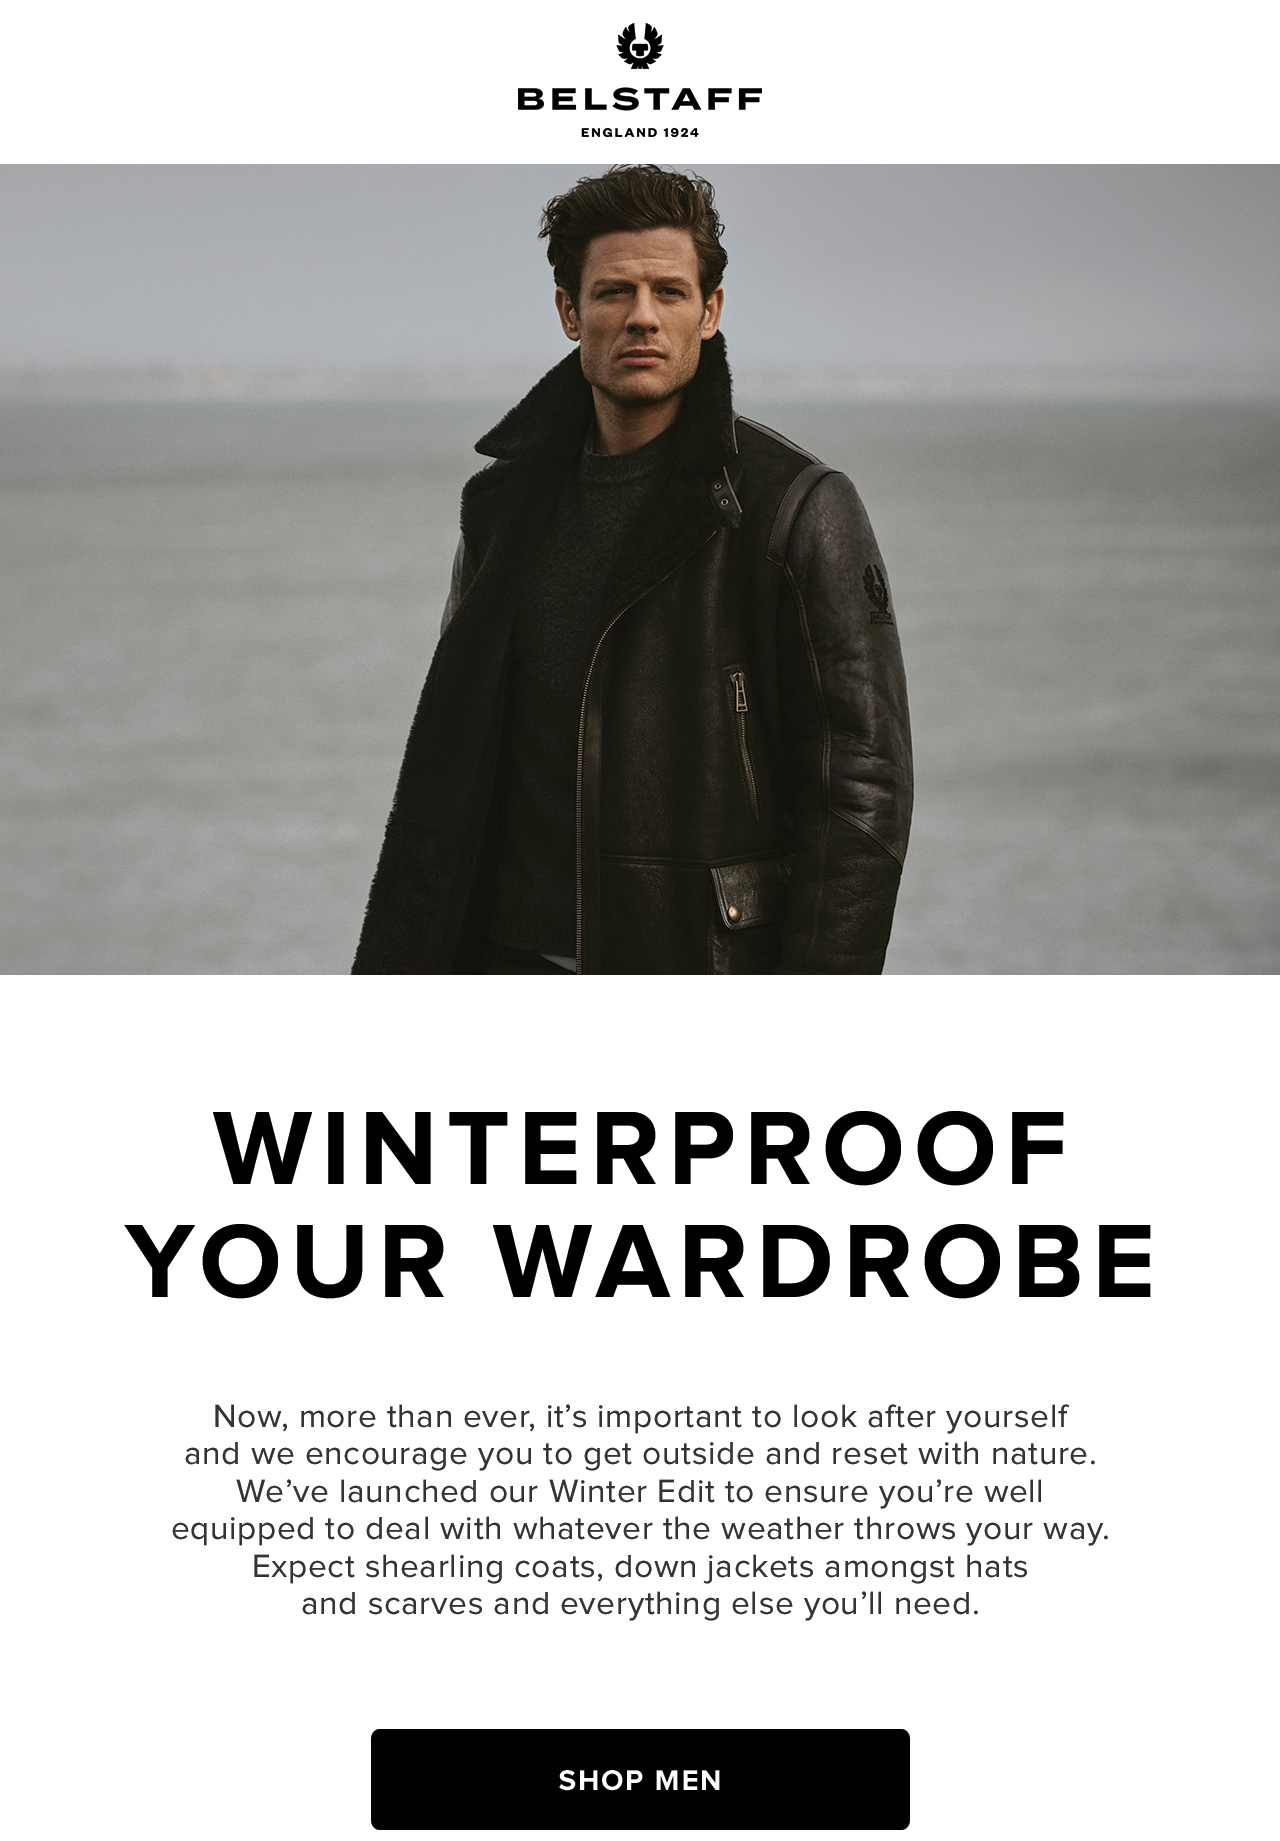 We've launched our Winter Edit to ensure you're well equipped to deal with whatever the weather throws your way.